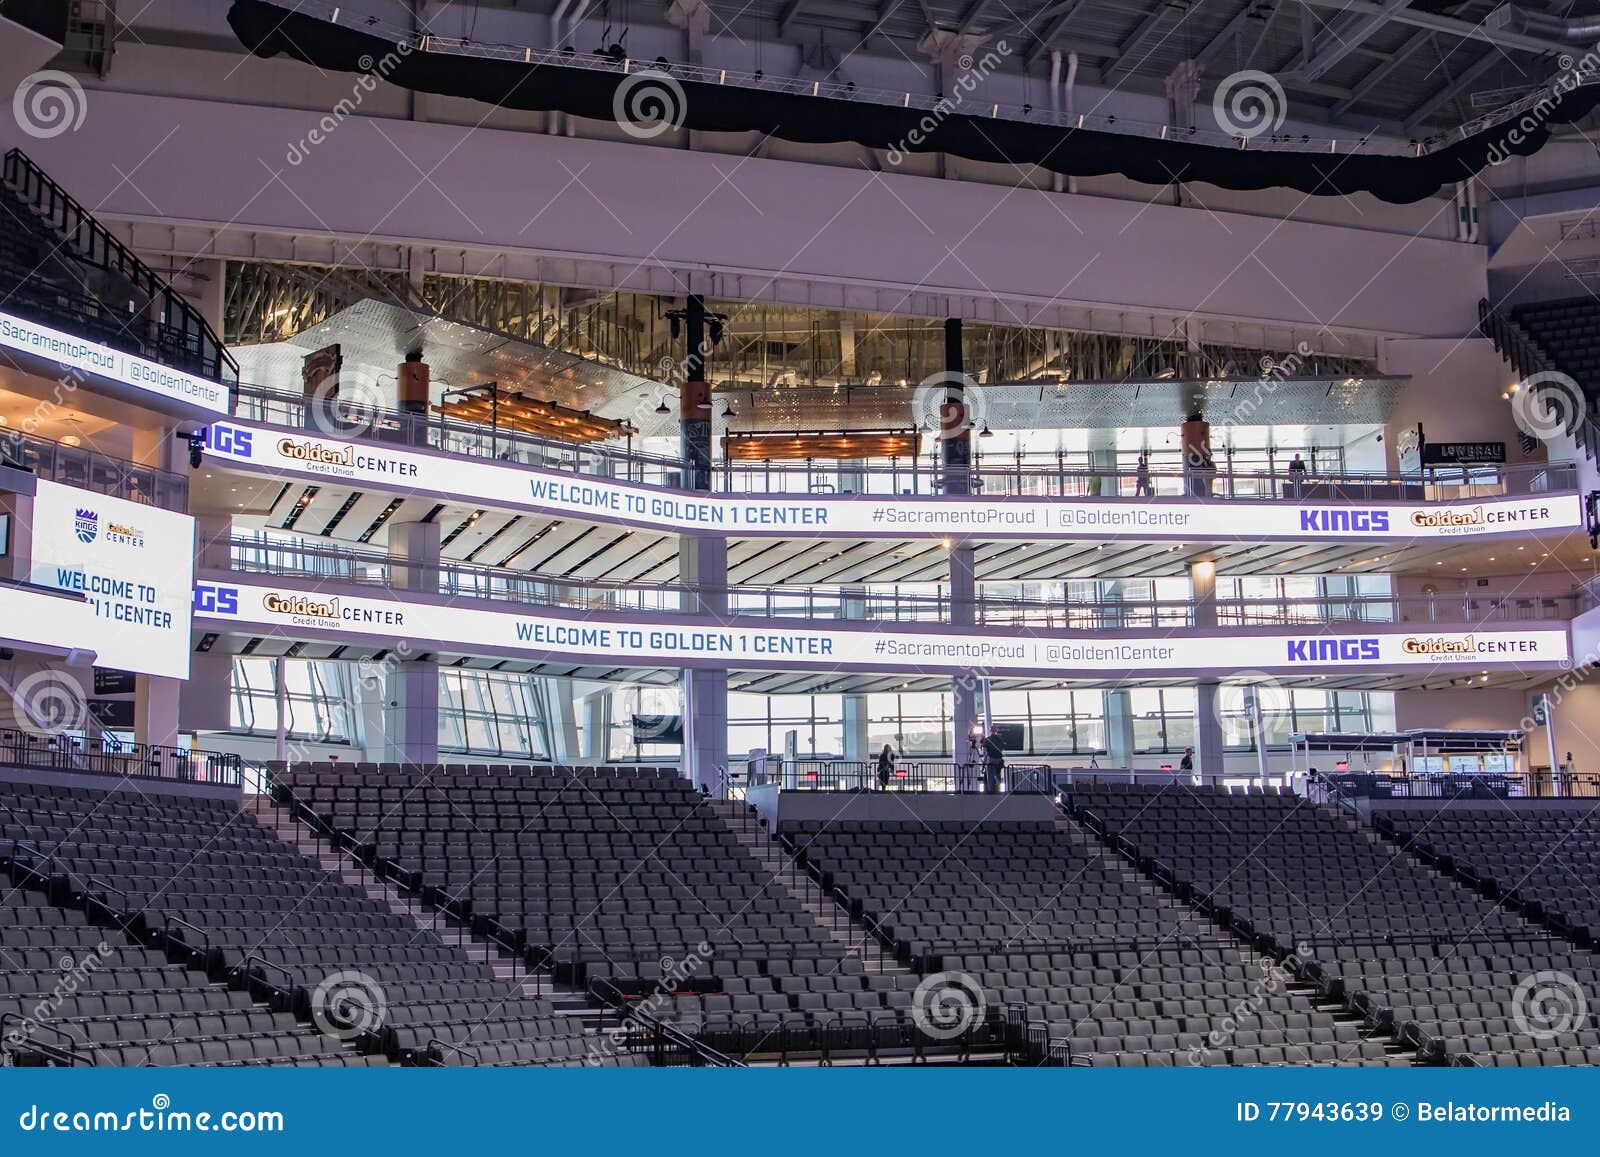 Golden 1 Center Sports Complex 8 Editorial Stock Image - Image of home,  styles: 77943634